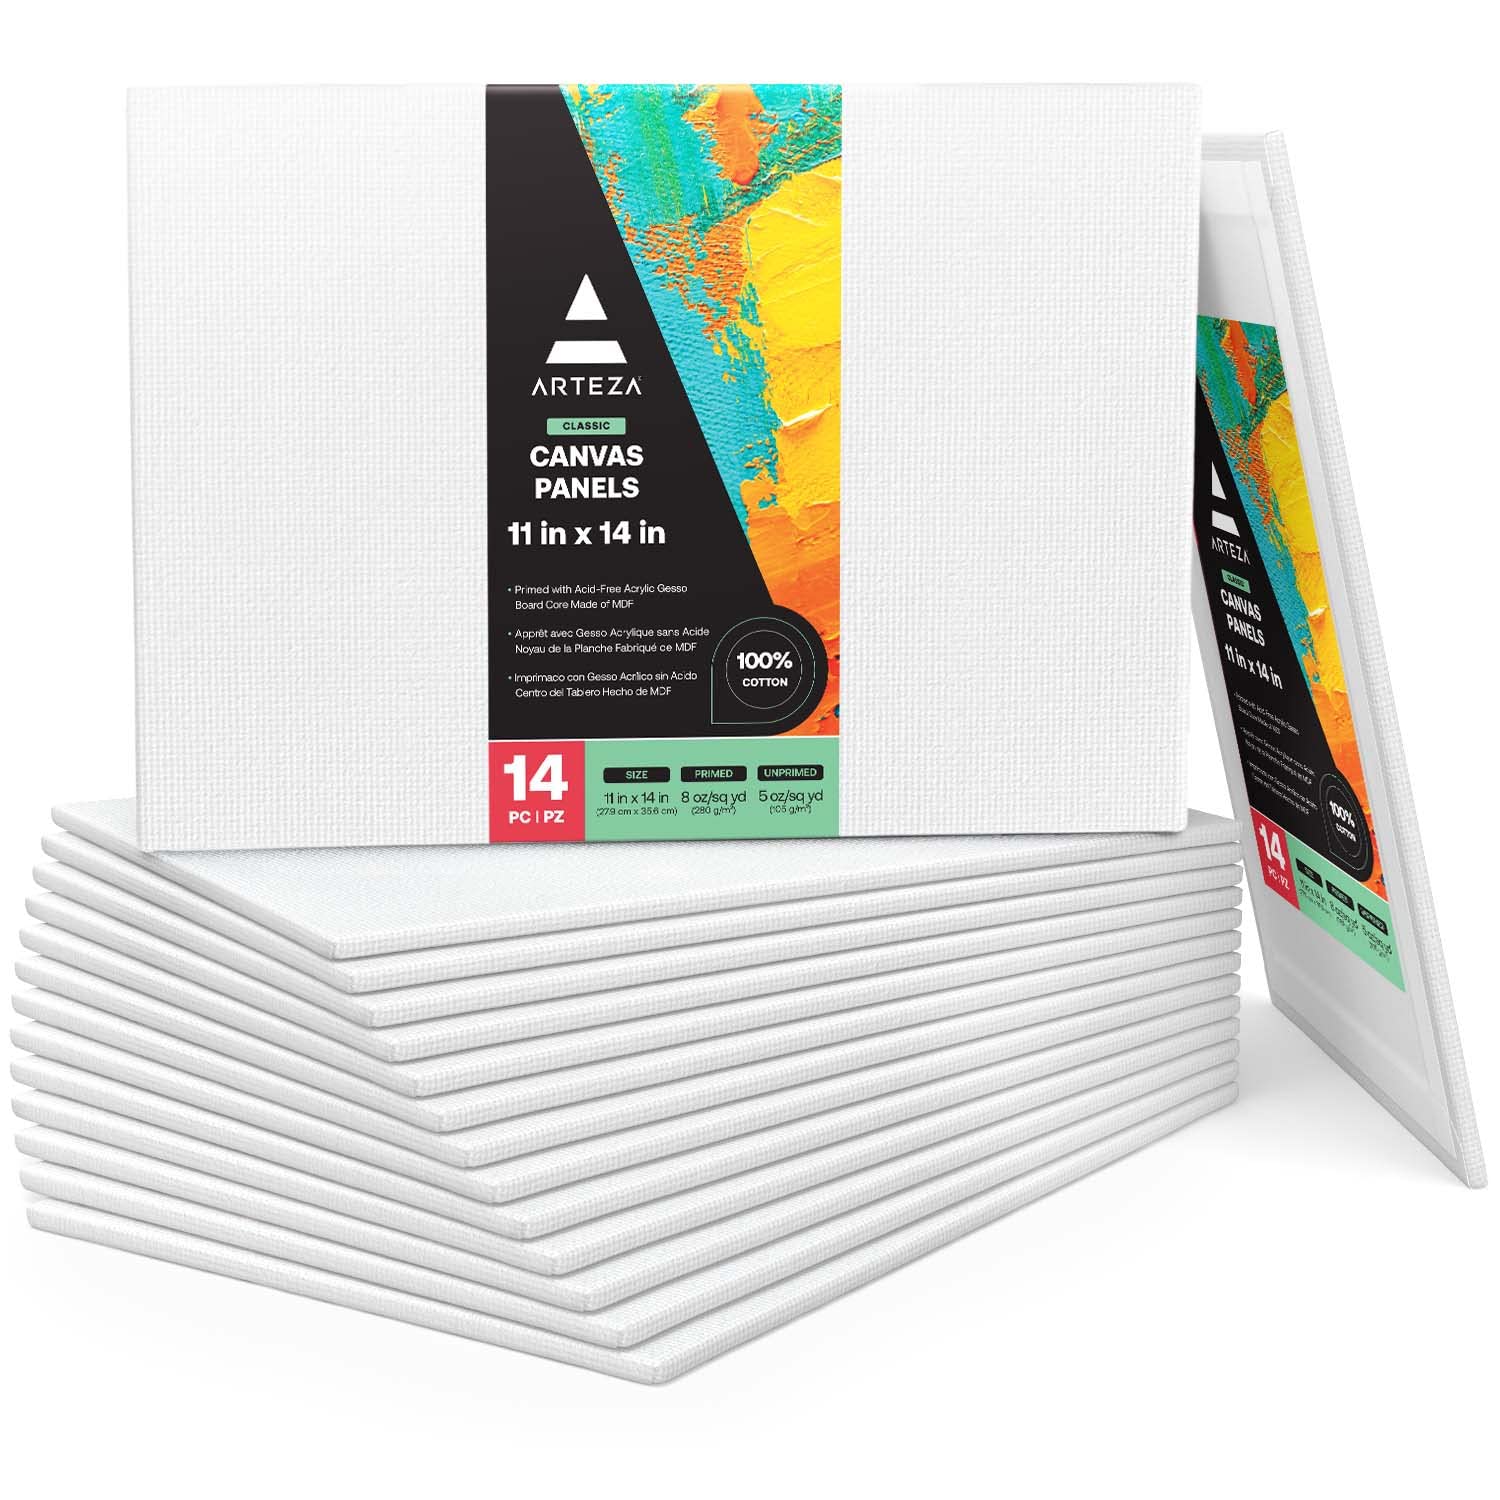 Arteza Canvas Board, Pack of 14, 27.9 x 35.6 cm, 8-oz Gesso Primed 100% Cotton Canvas Panels, Canvases for Acrylic Painting and Pouring